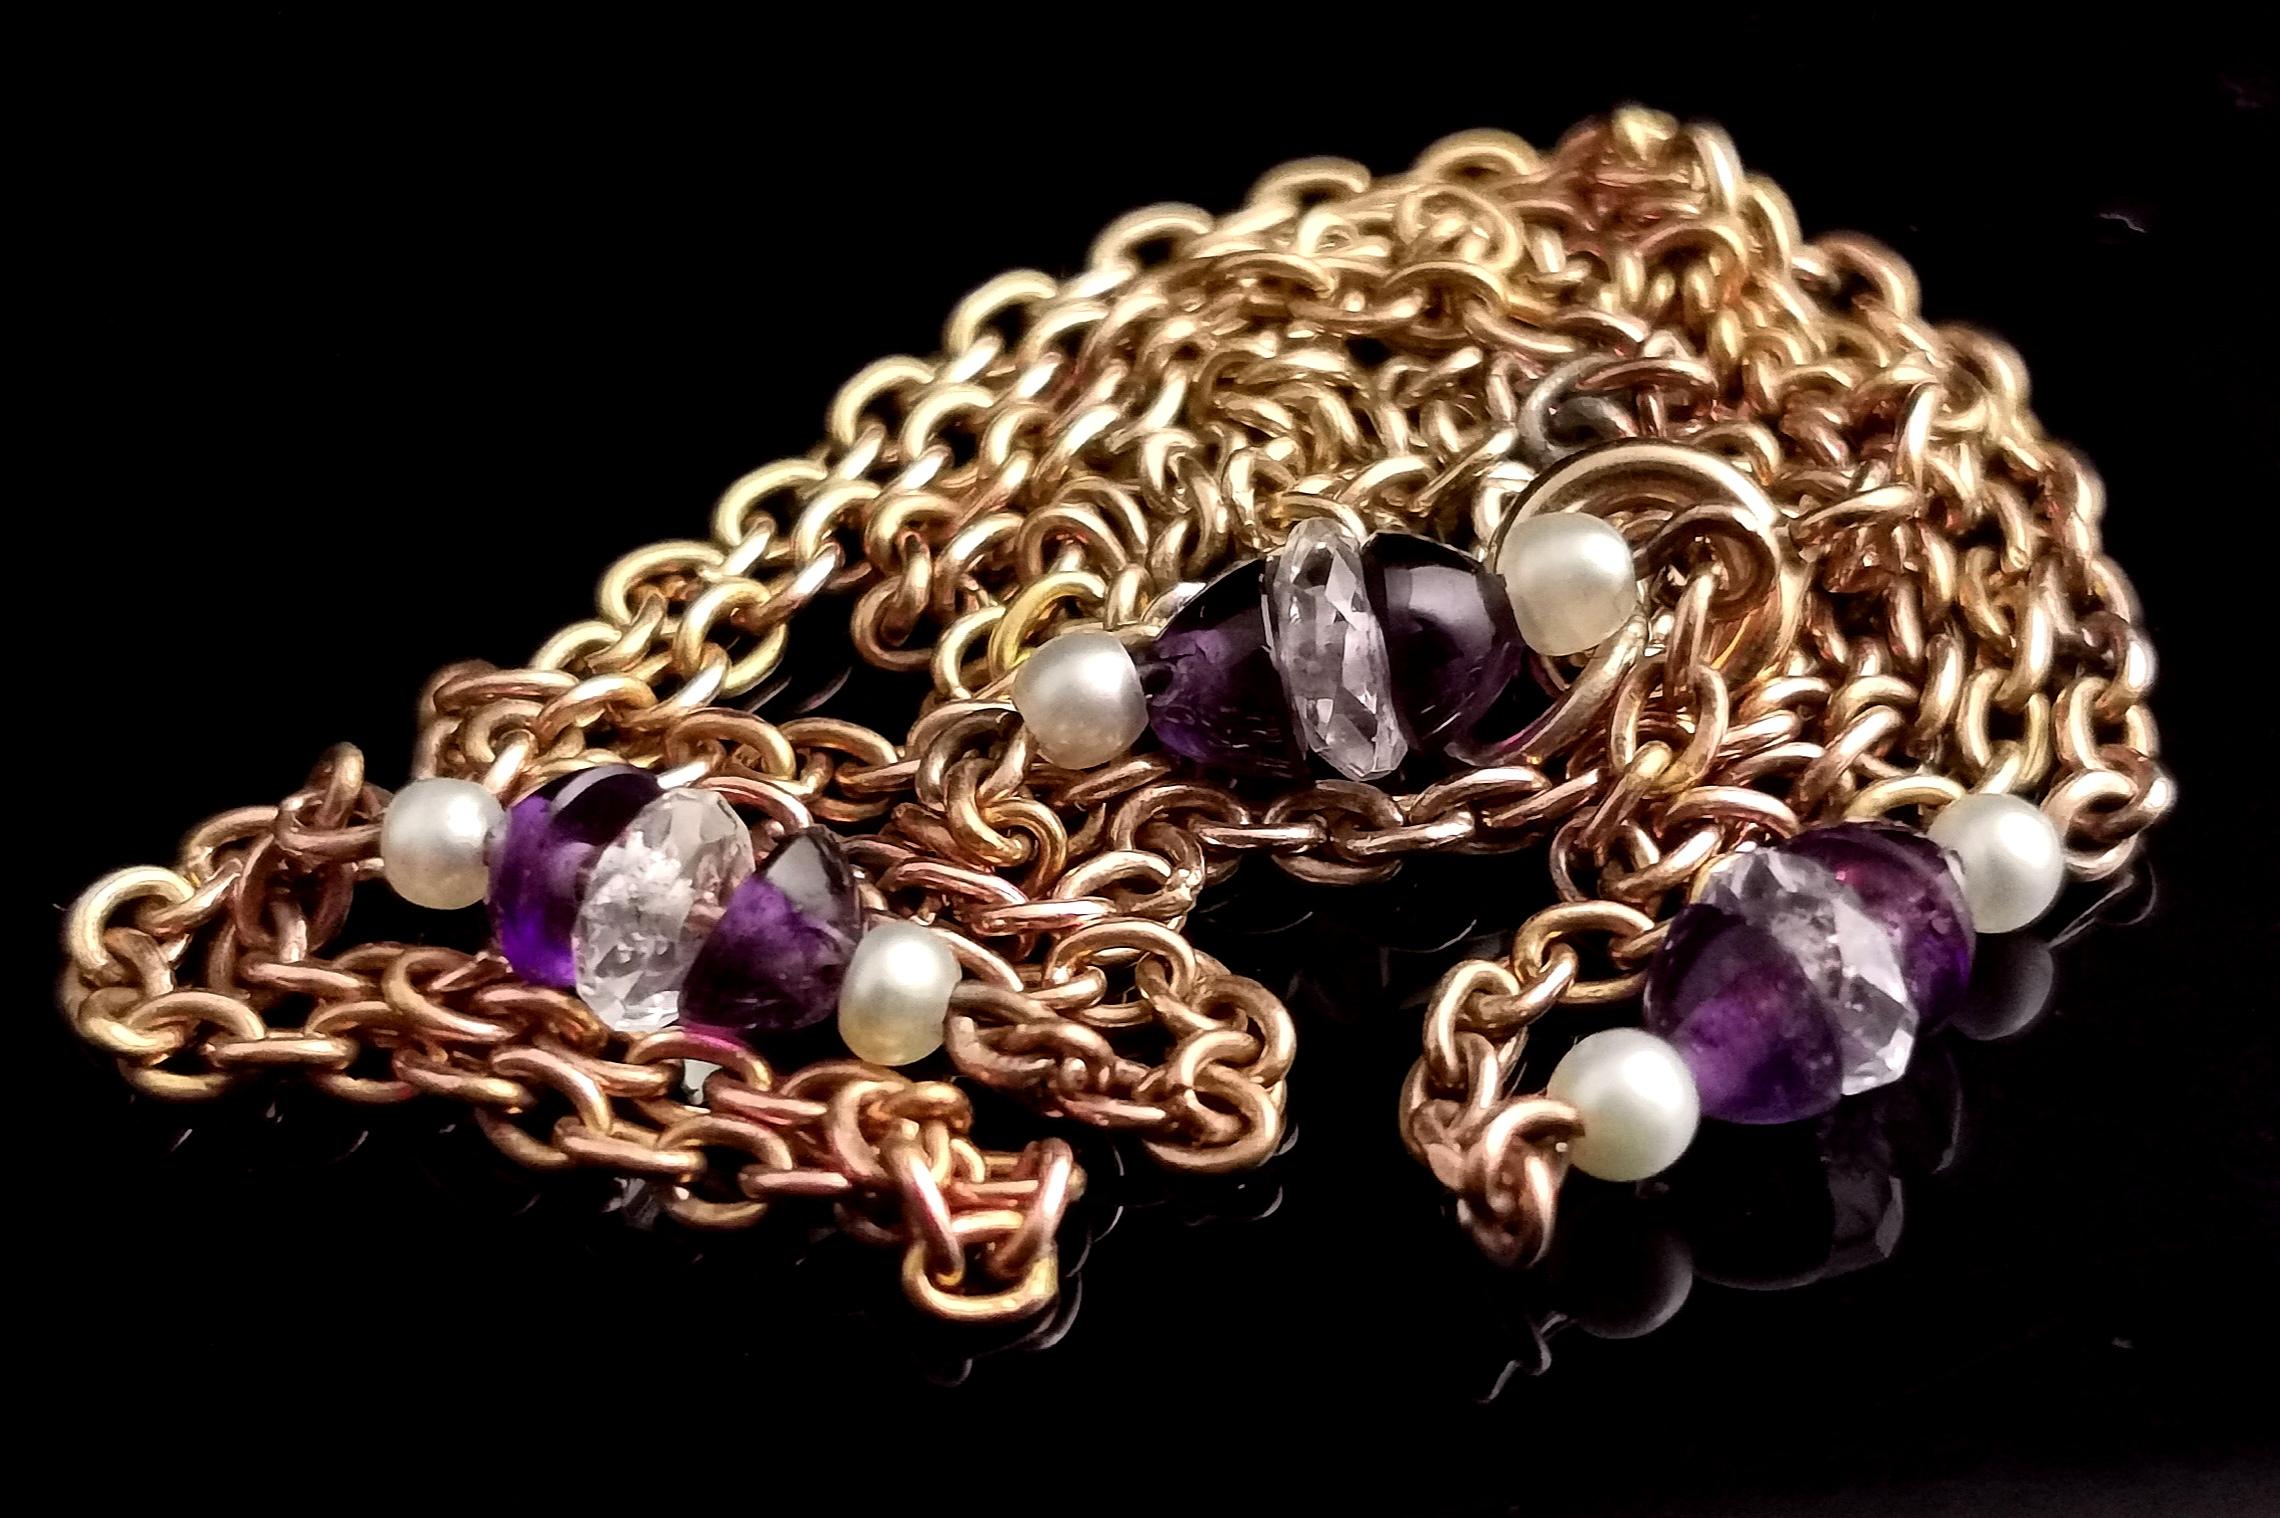 A beautiful vintage Art Deco 9kt yellow gold, Amethyst, seed pearl and rock crystal necklace.

The necklace features a fine rich 9kt gold chain link with three beaded spacer bars.

Each gold bar is adorned with a faceted rock crystal bead sandwiched